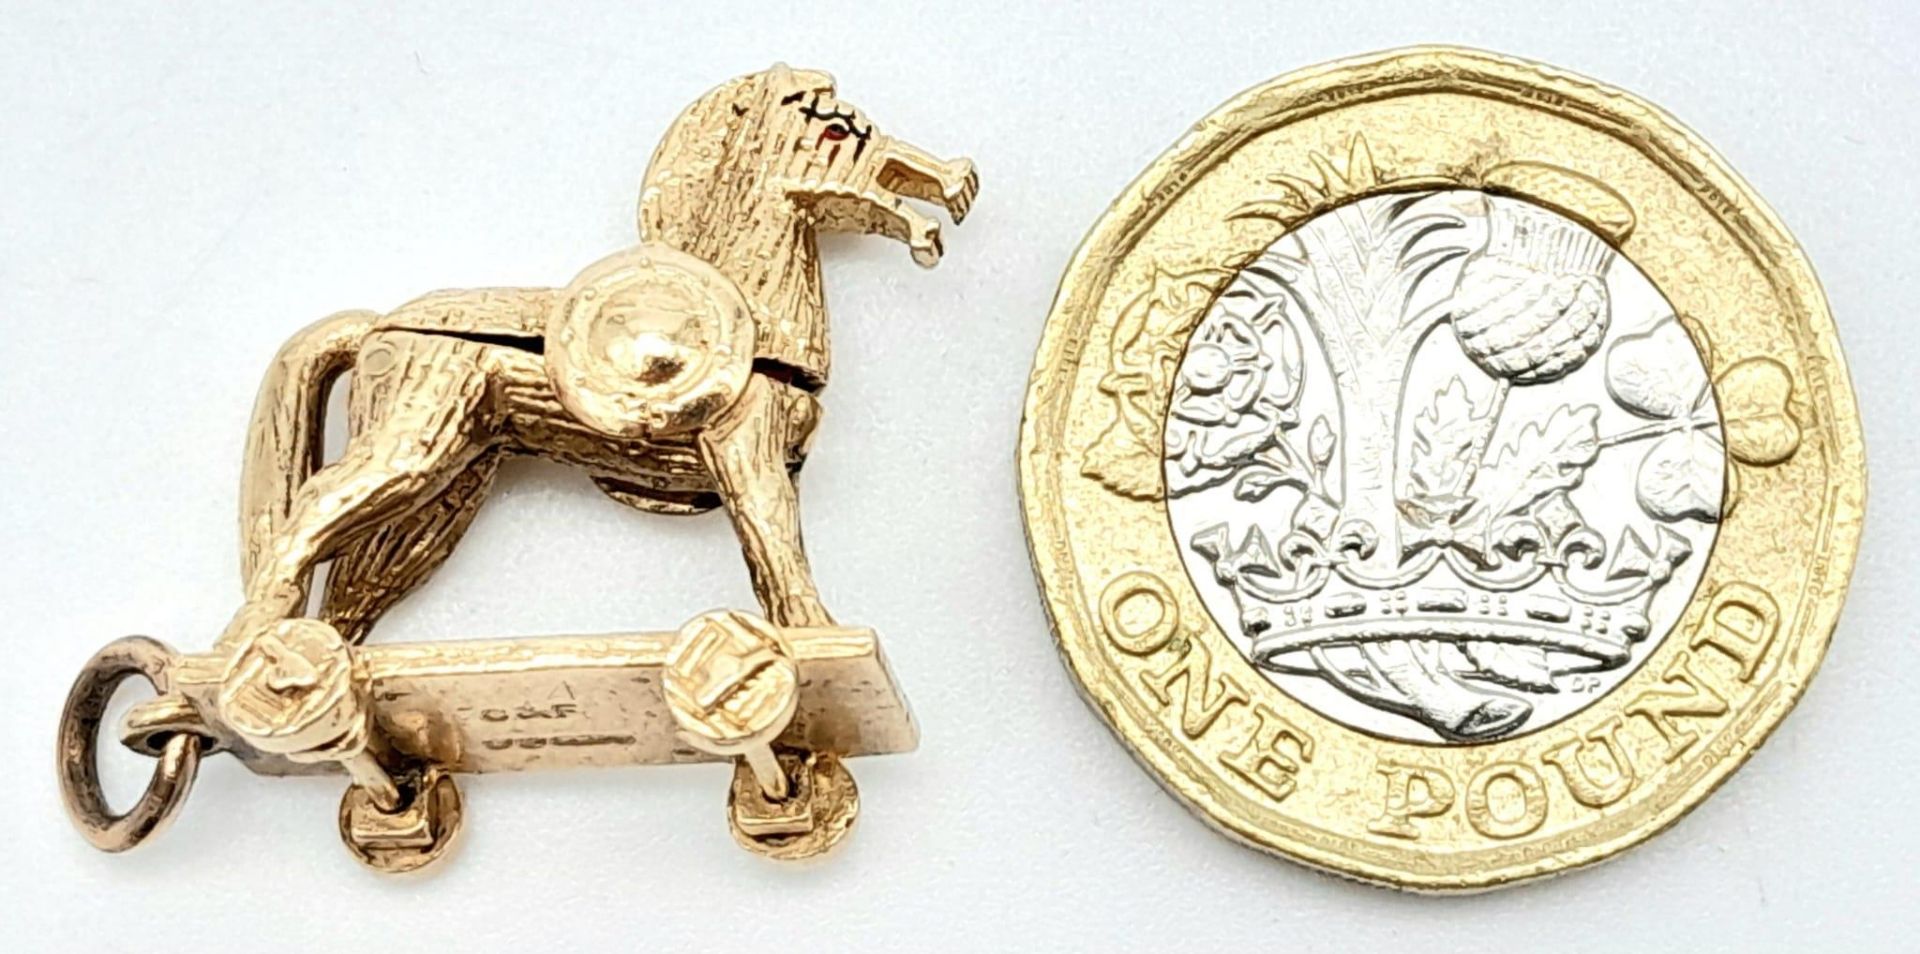 A 9K Yellow Gold Hobby Horse Charm. Opens to reveal soldiers. 2.4cm x 2.3cm, 5.8g total weight. Ref: - Image 5 of 6